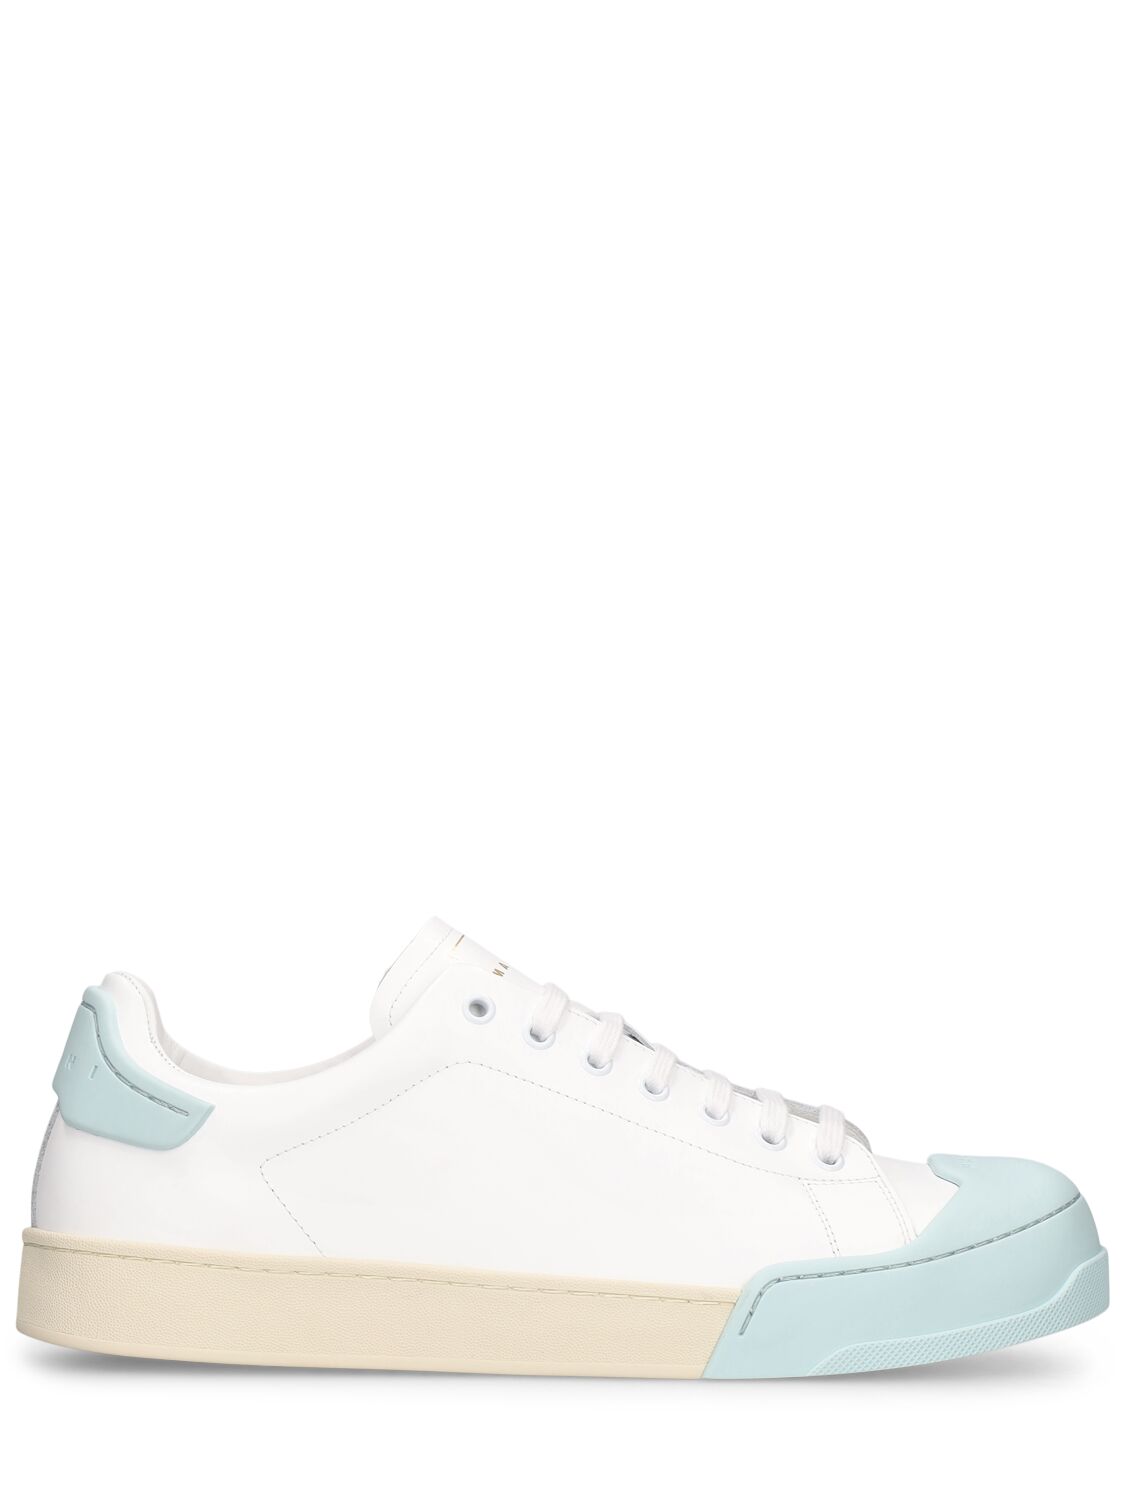 Image of Dada Bumper Leather Low Top Sneakers